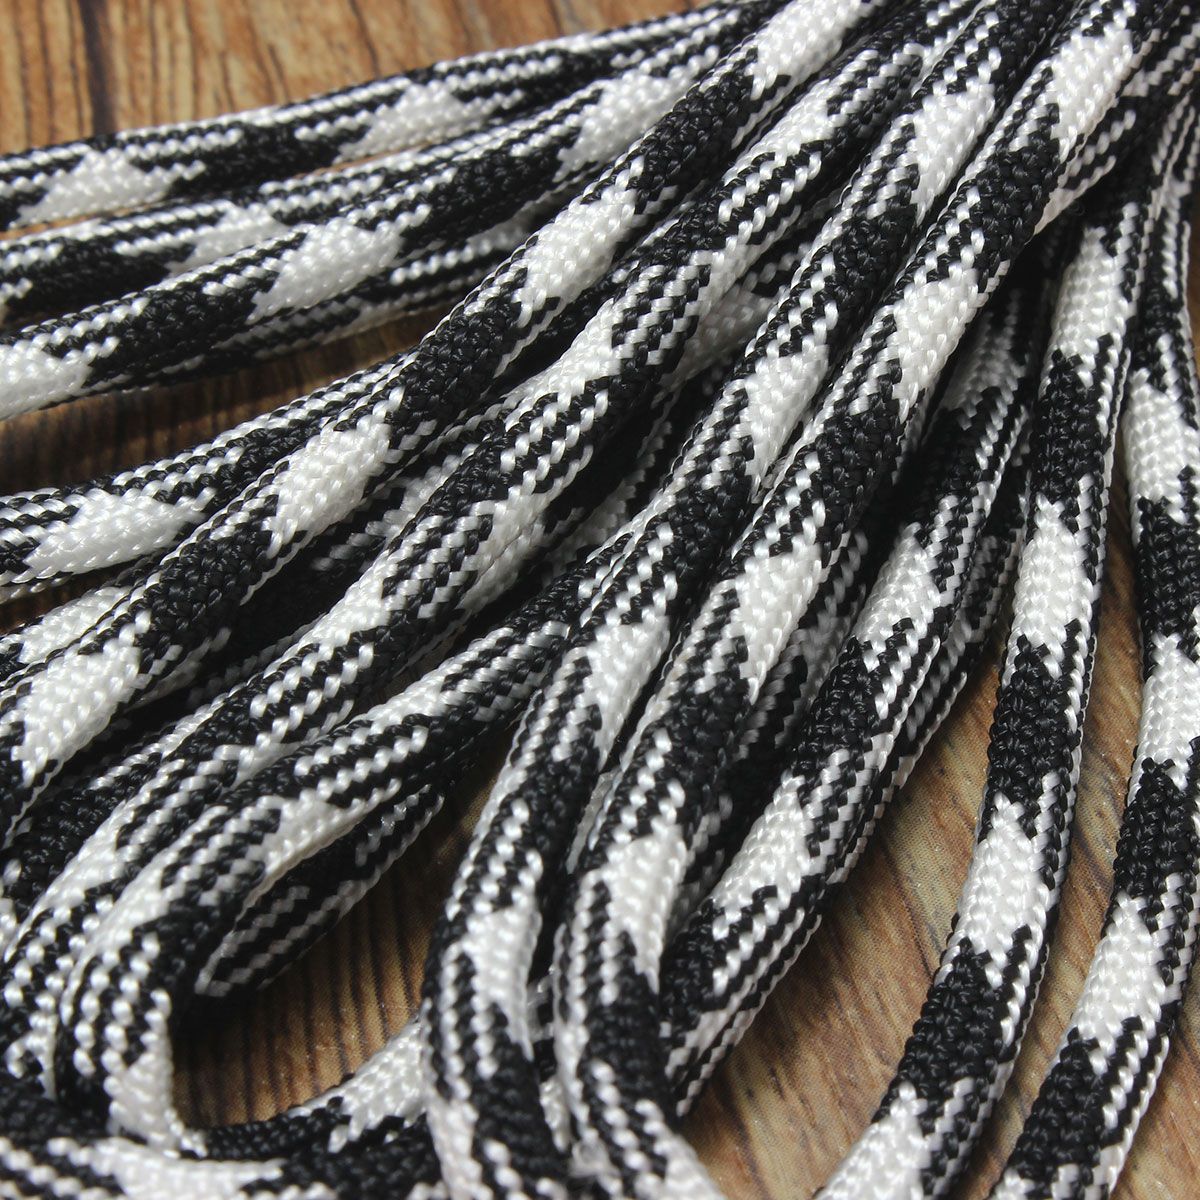 15ft-5m-7-Inner-Strand-505-550-Mil-Survival-Paracord-Bushcraft-Survival-Cord-Lanyard-Rope-Type-III-1349688